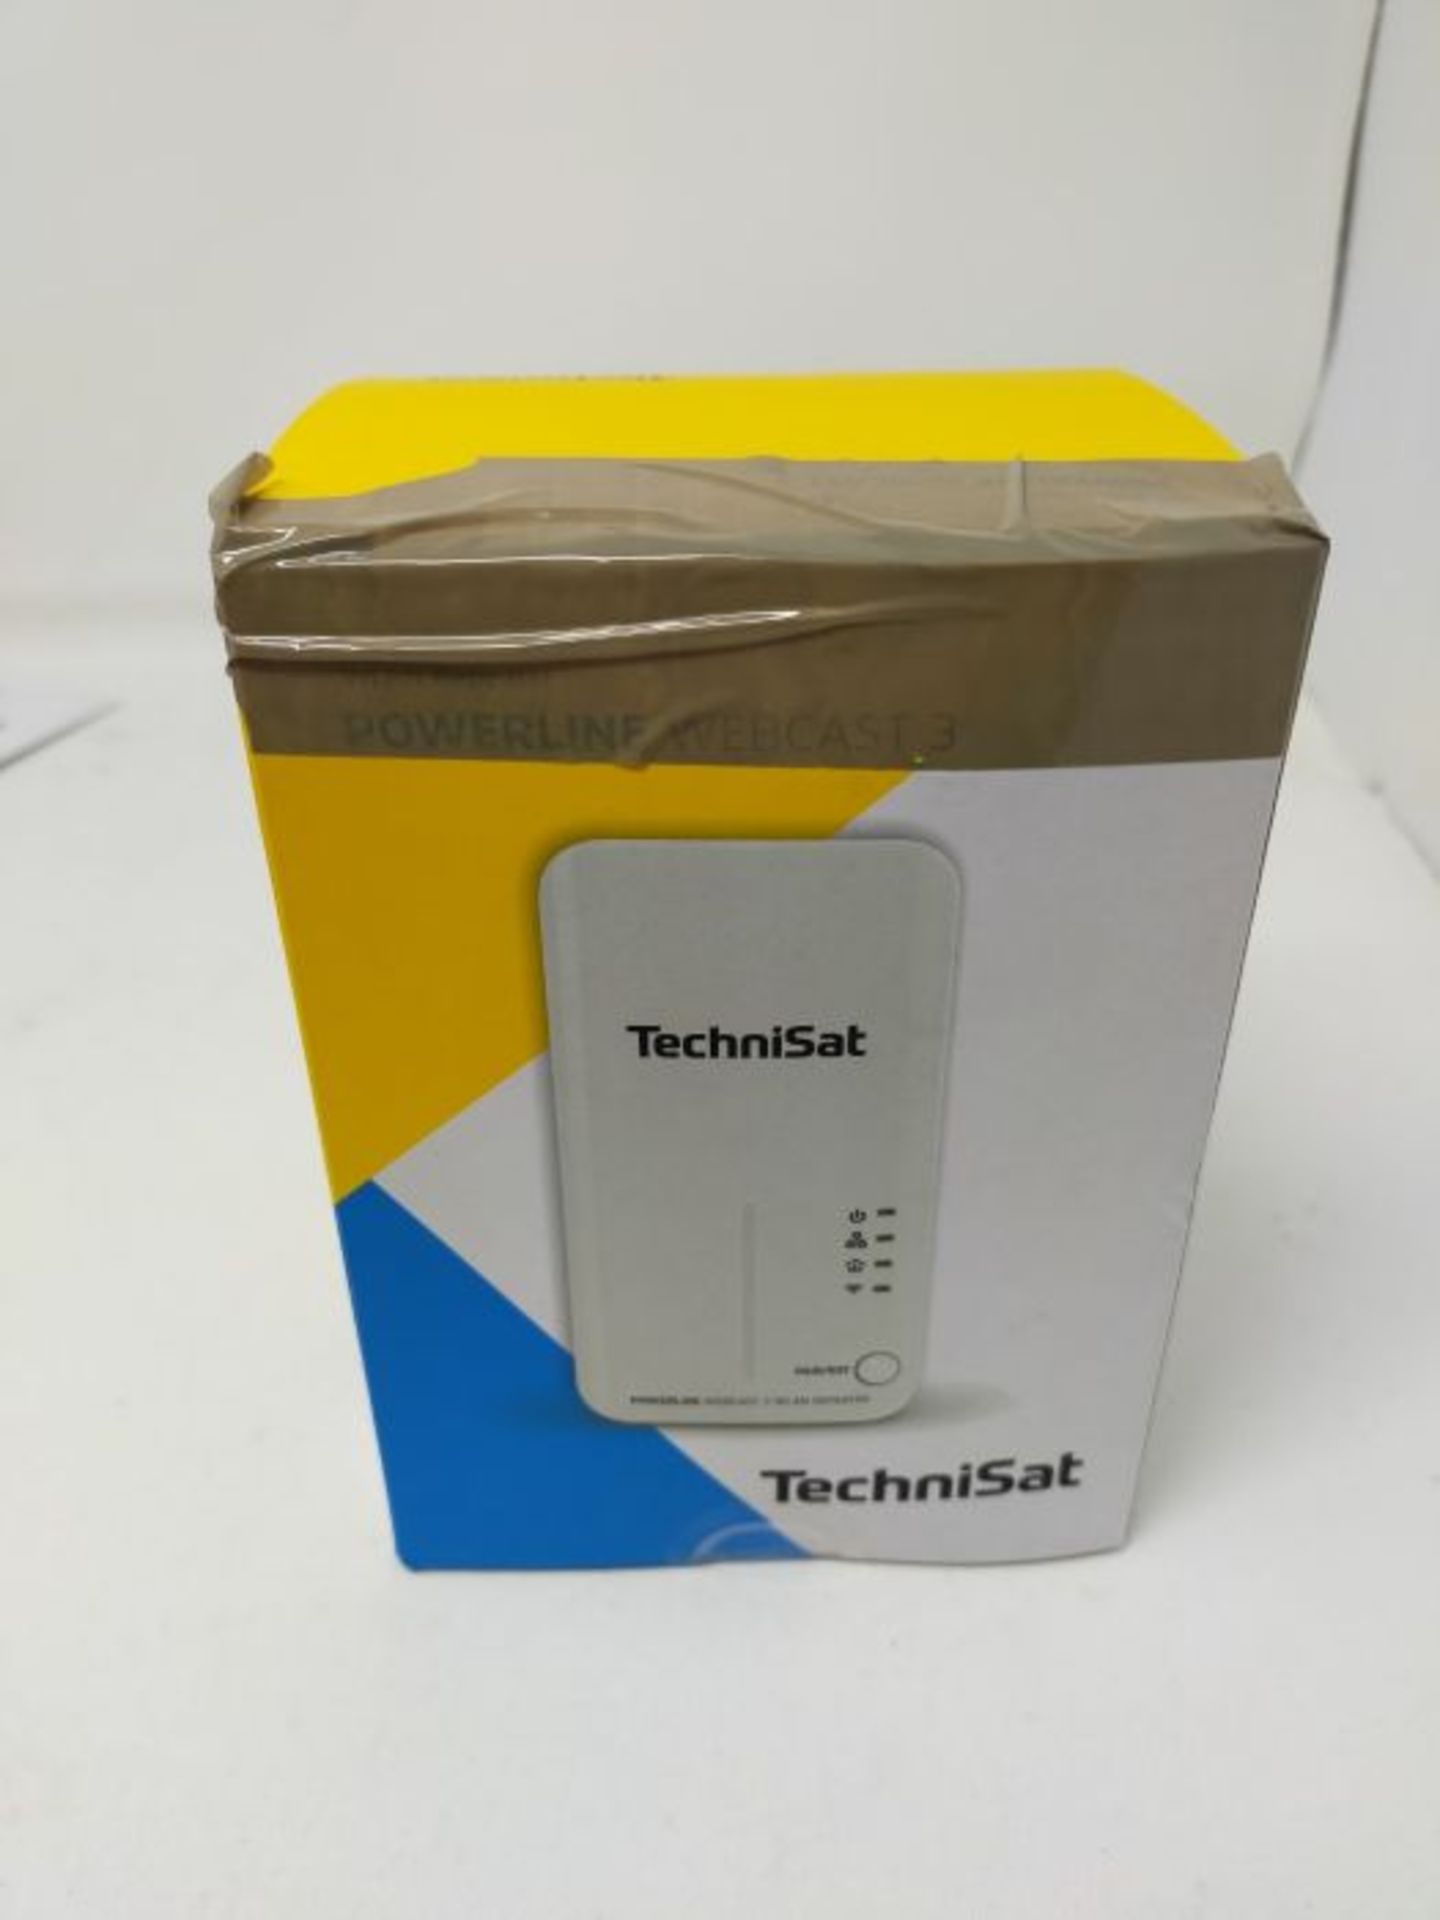 TechniSat Powerline WebCast 3 WLAN Repeater (to extend the range of existing WLAN netw